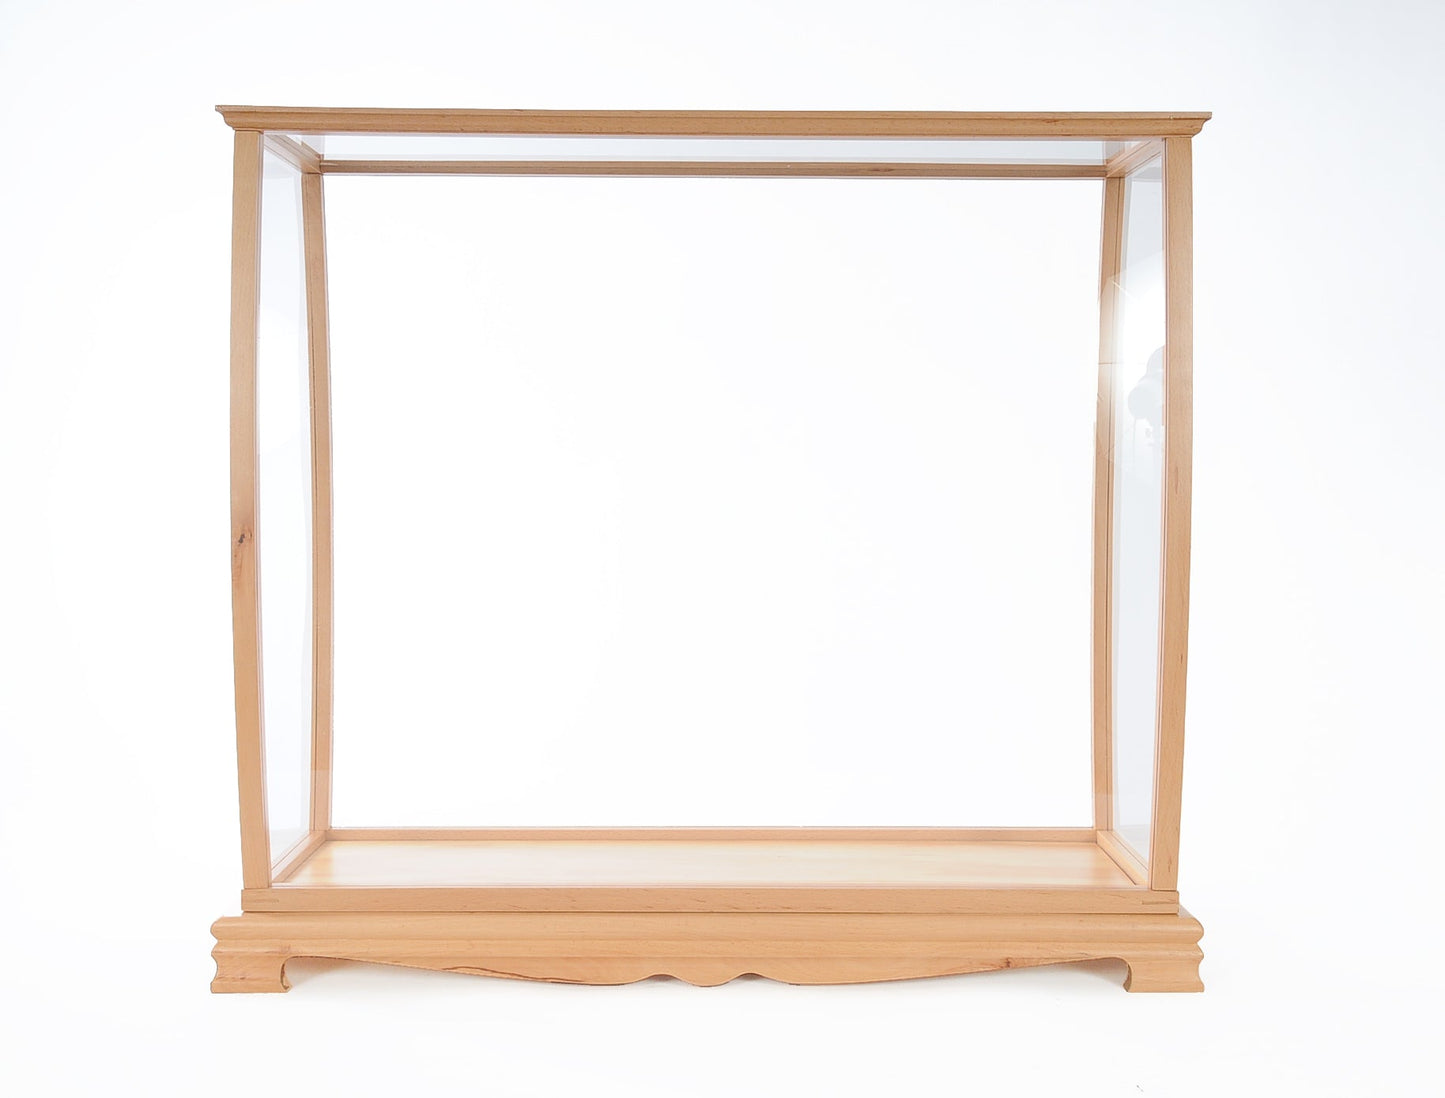 ALDO Creative Arts Collectibles Scale Model Outside :	L: 36 W: 13 H: 31.5 Inches / Inside : L: 32.5 x W: 12 x H: 29 inches. / NEW / Mahogany Wood and with Plexiglass Panels Display Case Wood with Plexiglass Panels Cabinet for  Midsize Tall Ship Models Clear Finish